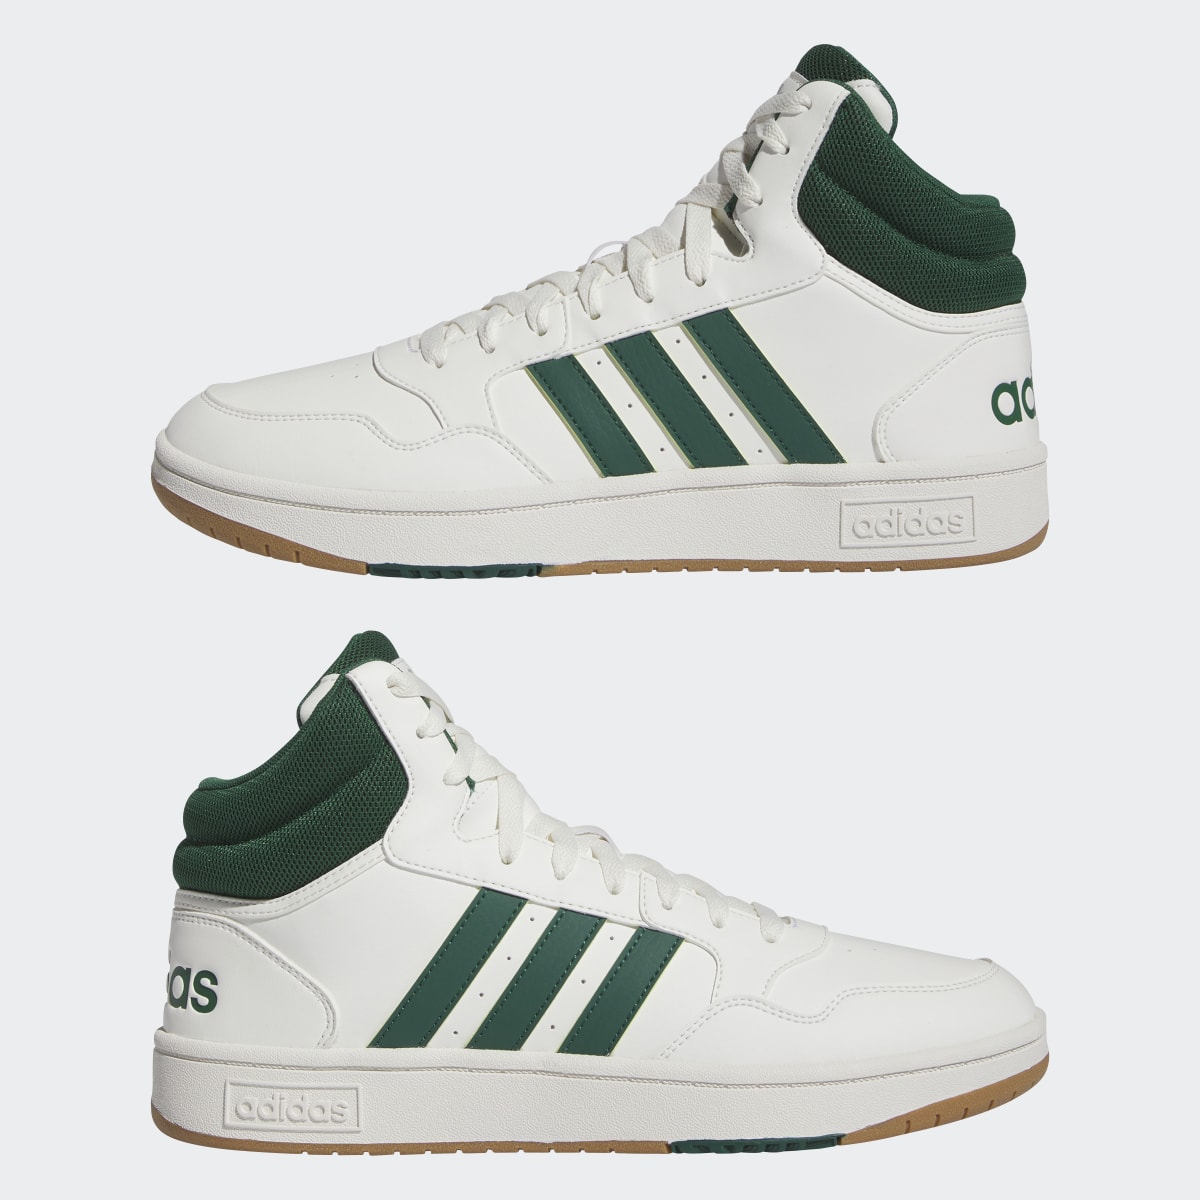 Adidas Hoops 3.0 Mid Lifestyle Basketball Classic Vintage Shoes. 8